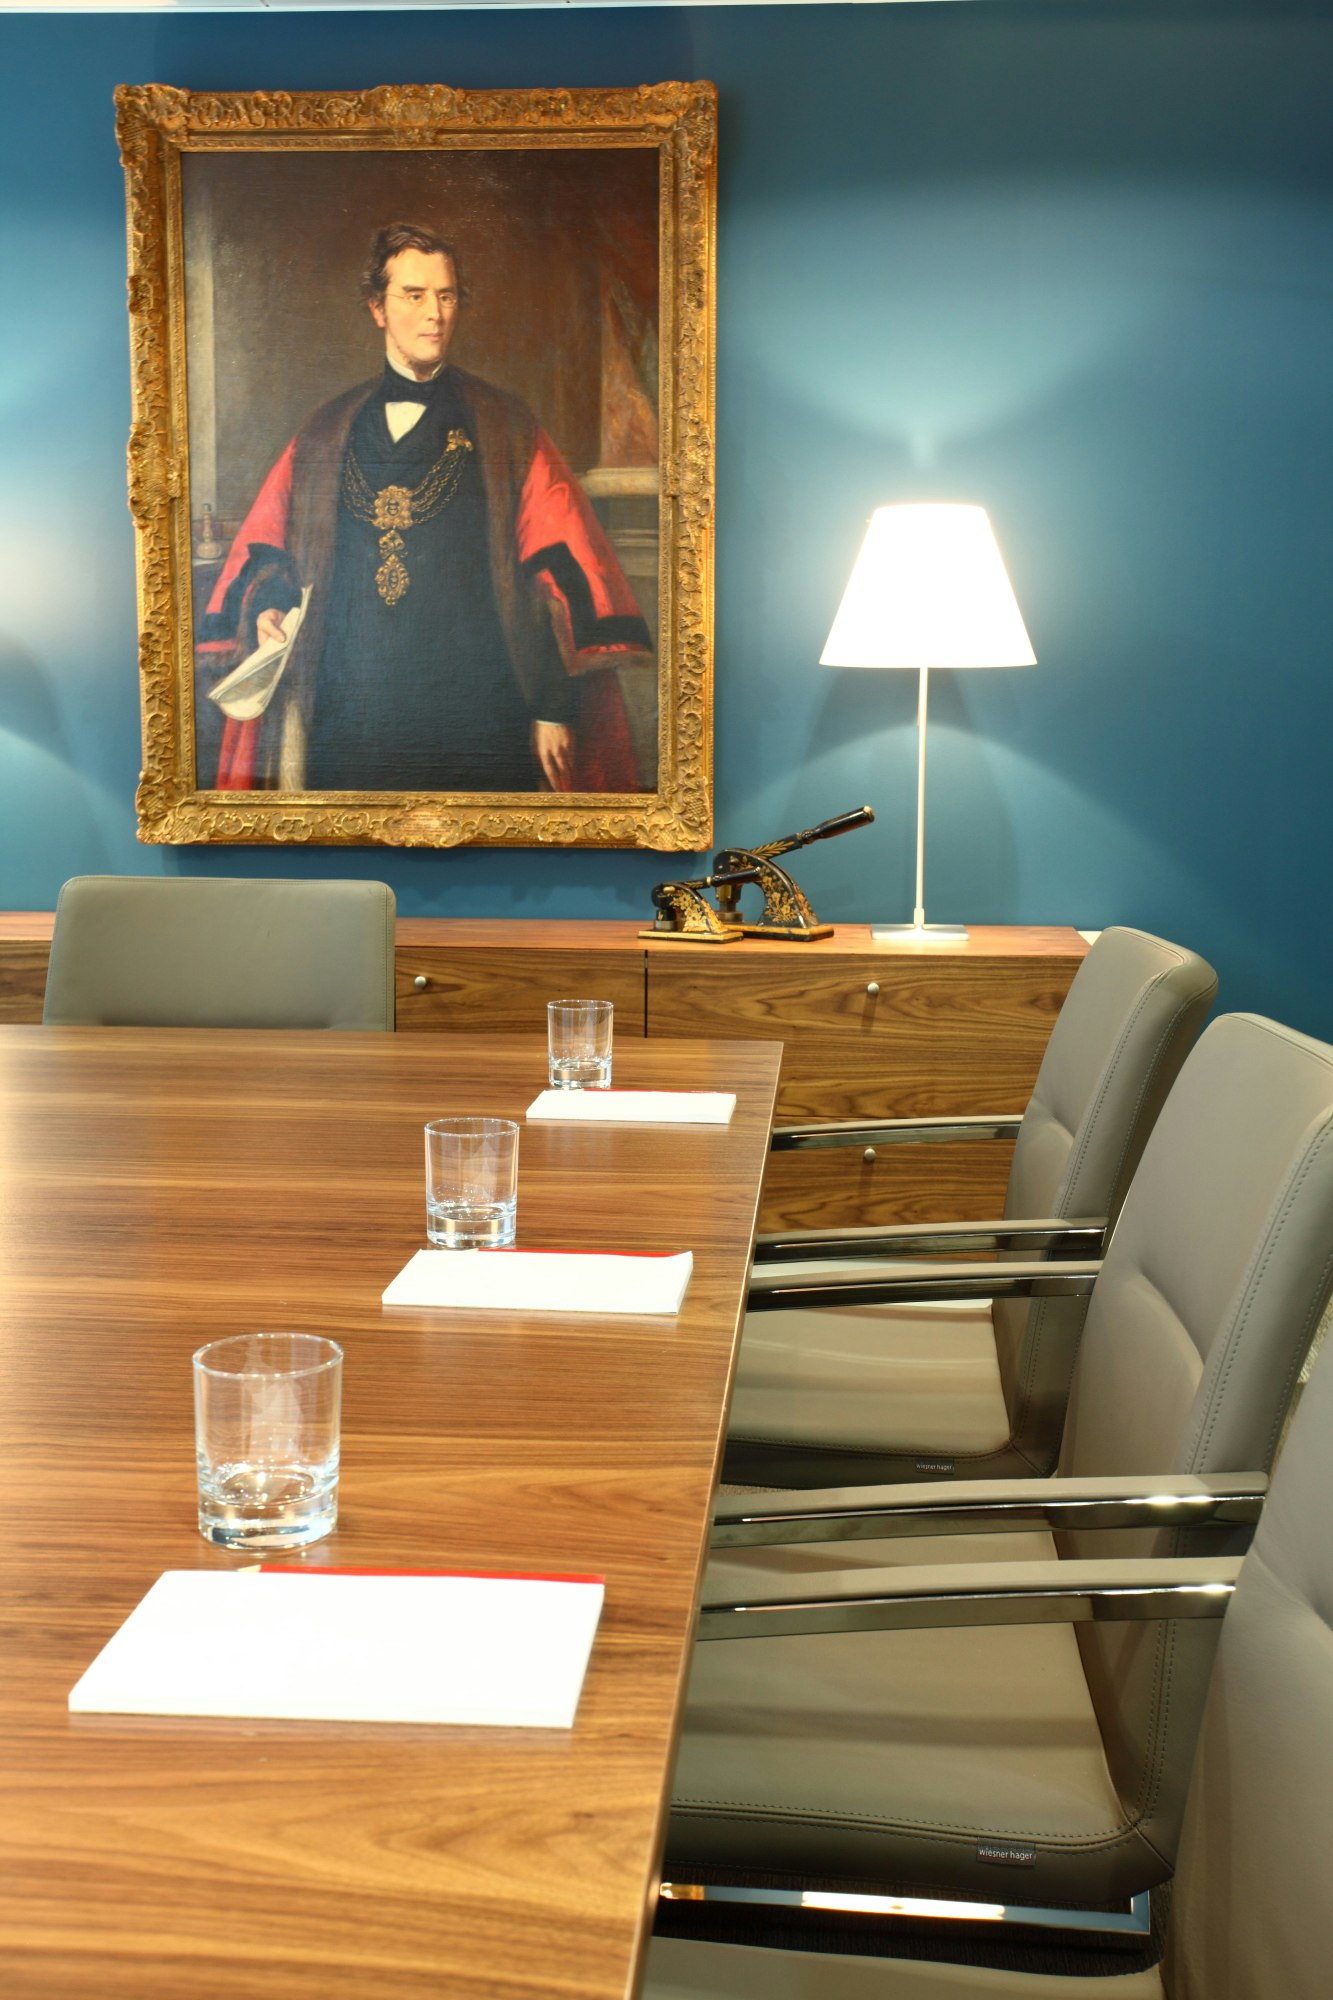 UK Chamber of Shipping - Boardroom image 2